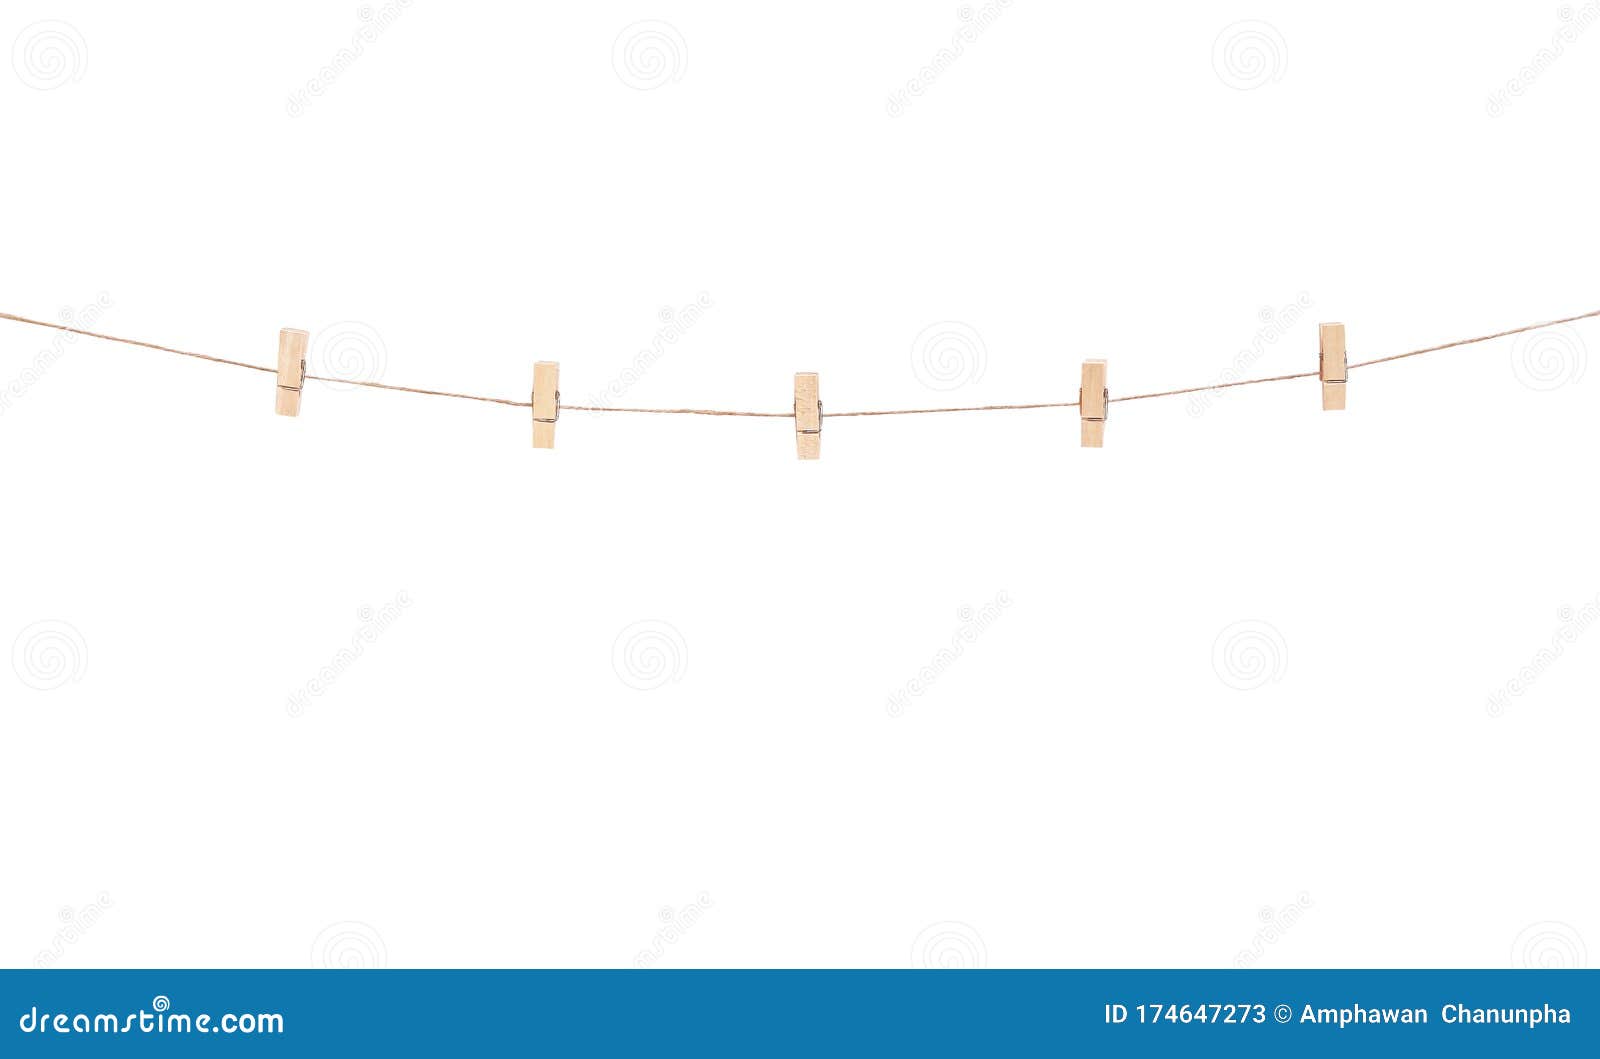 wooden clothes pins hanging on brown rope   on white background